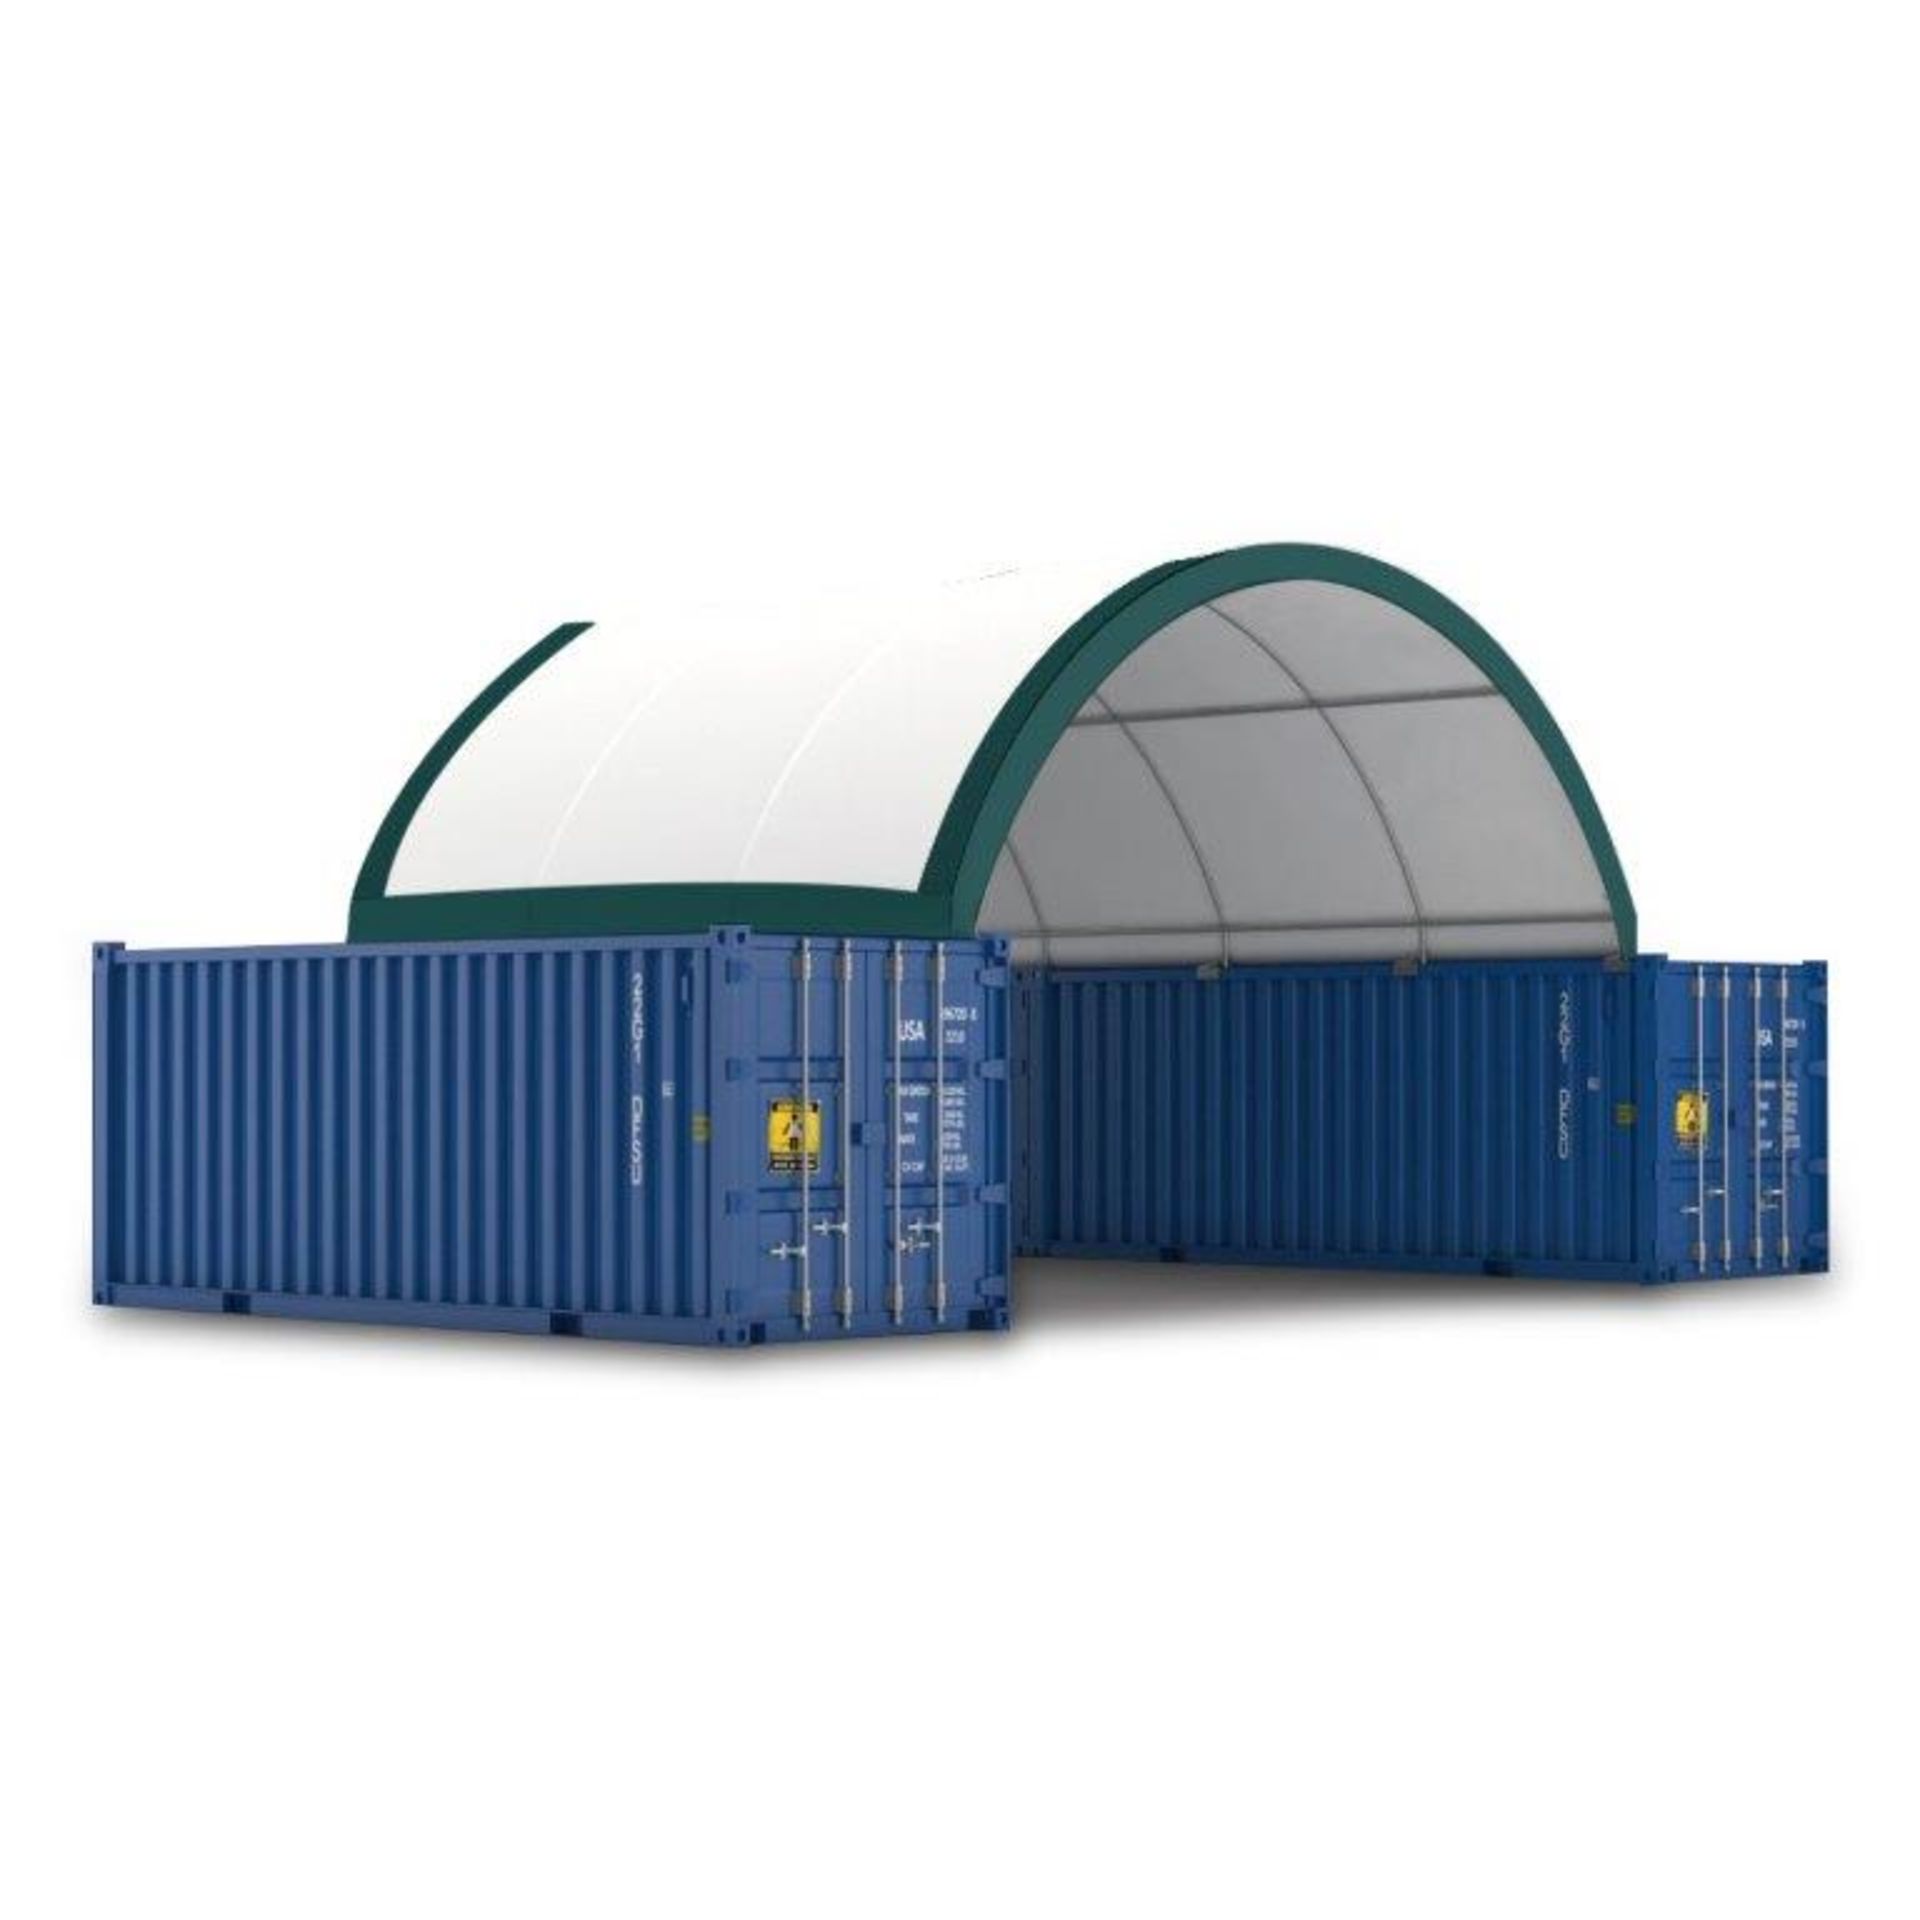 CONTAINER SHELTER 2020 PE - TMG-ST2020C